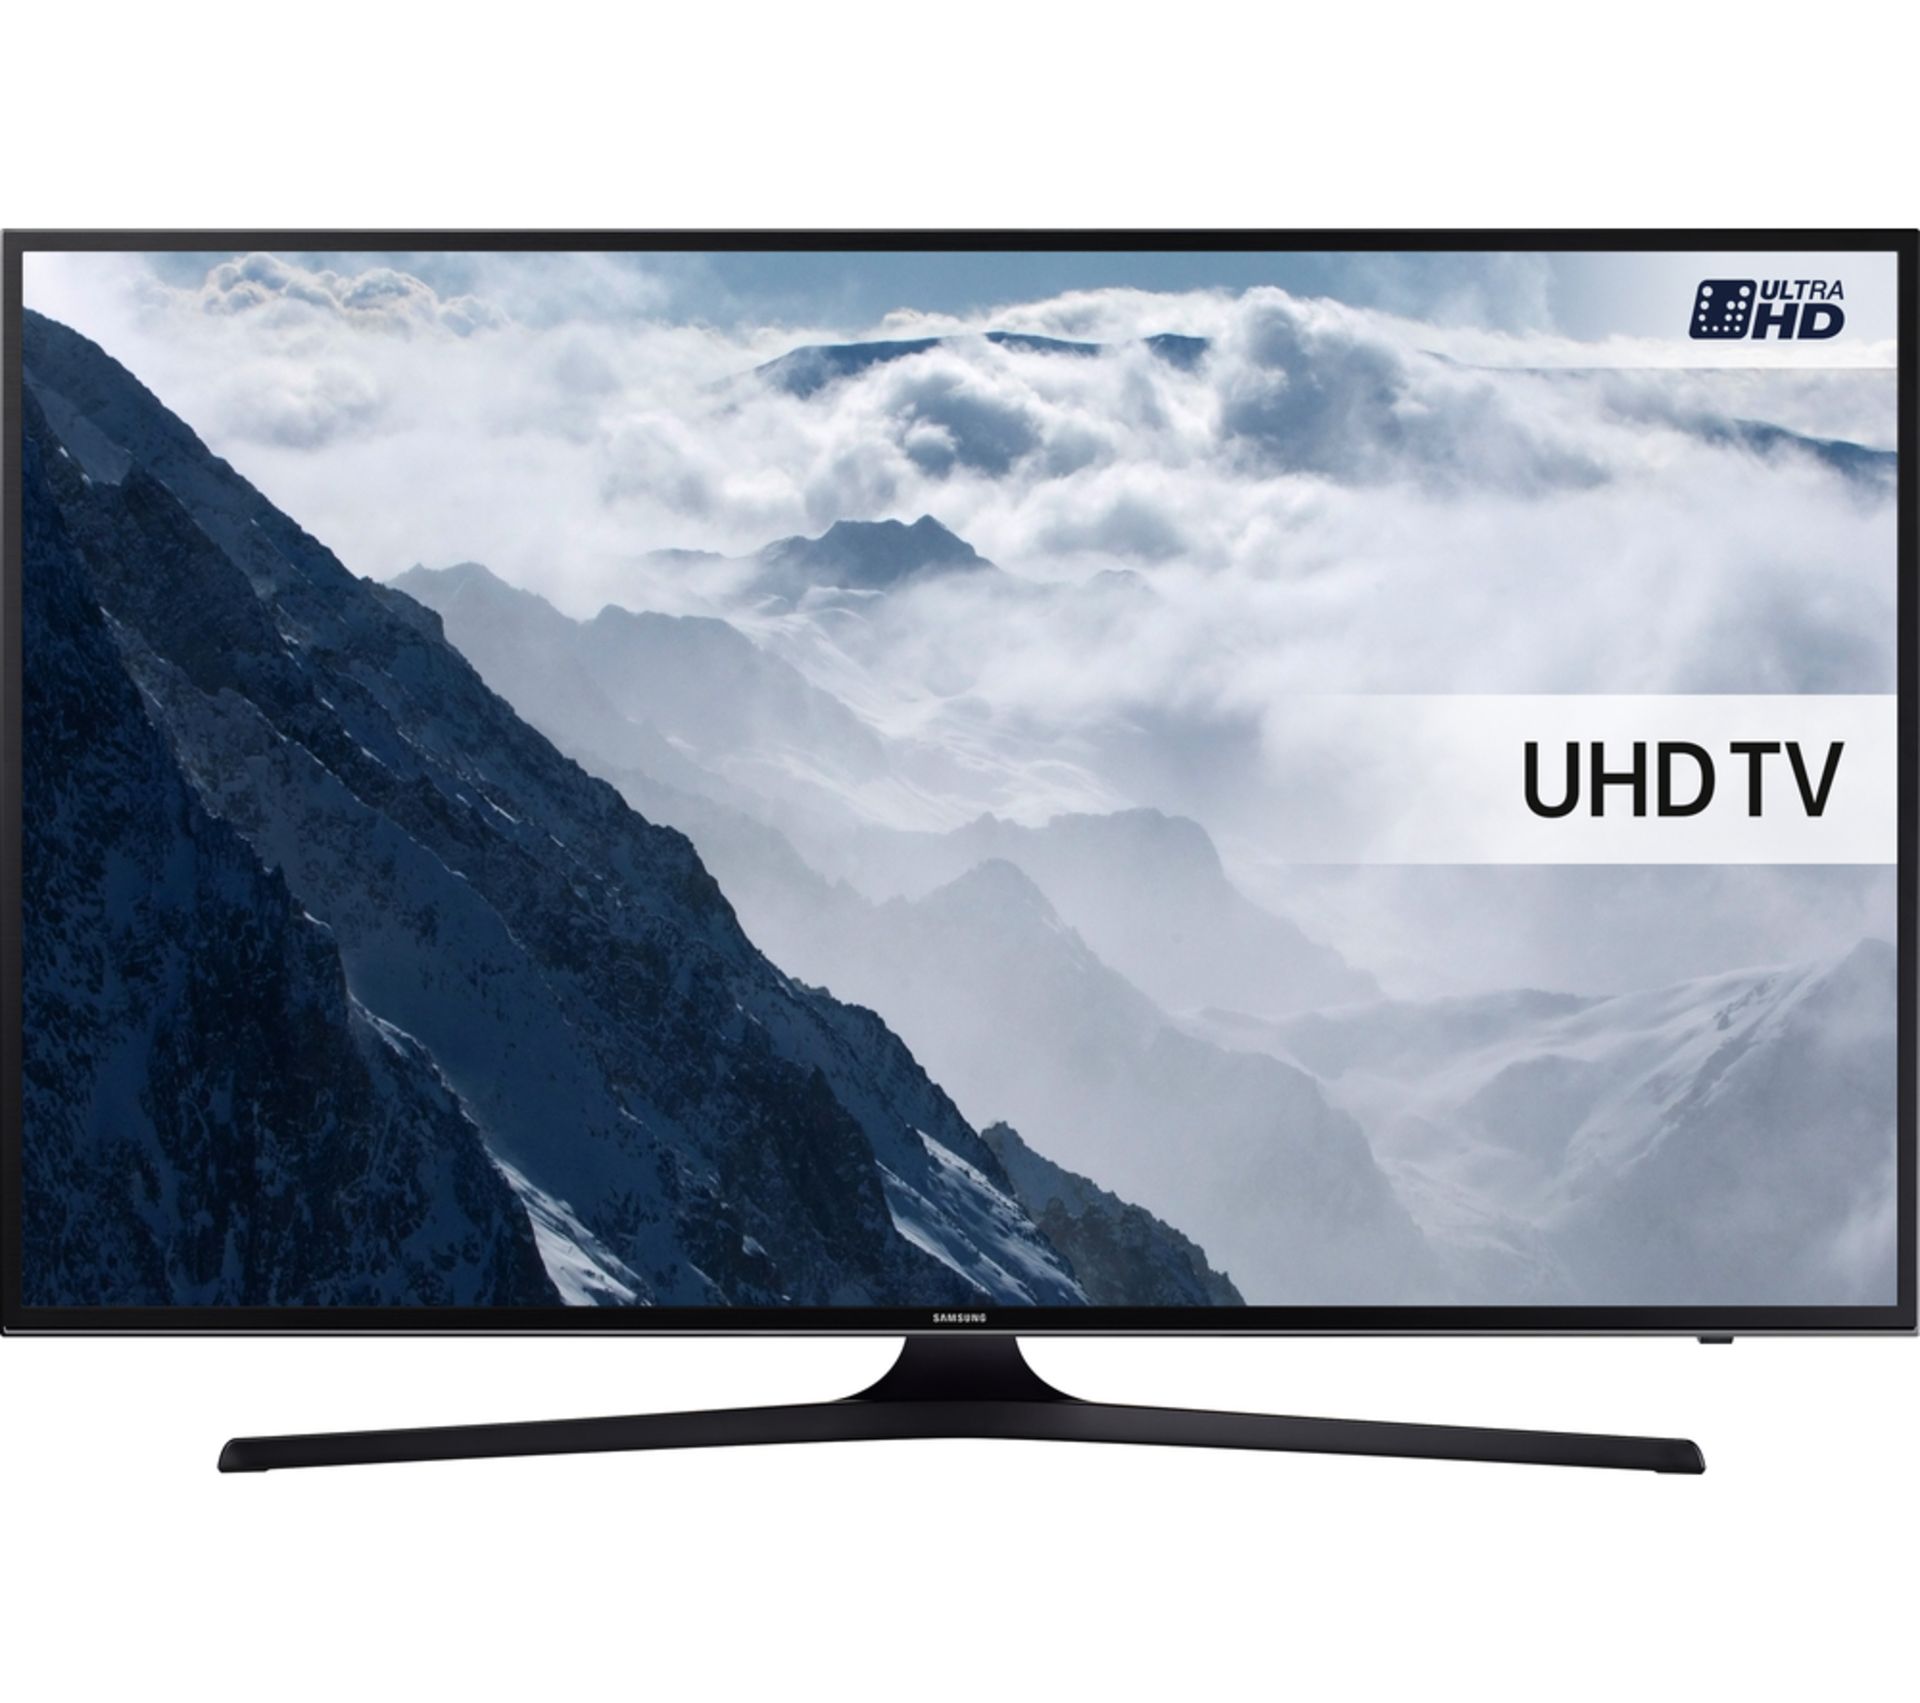 SAMSUNG UE43KU6000 Smart 4k Ultra HD HDR 43" LED TV. RRP £549. 4k Ultra HD picture is up to 4 - Image 3 of 4